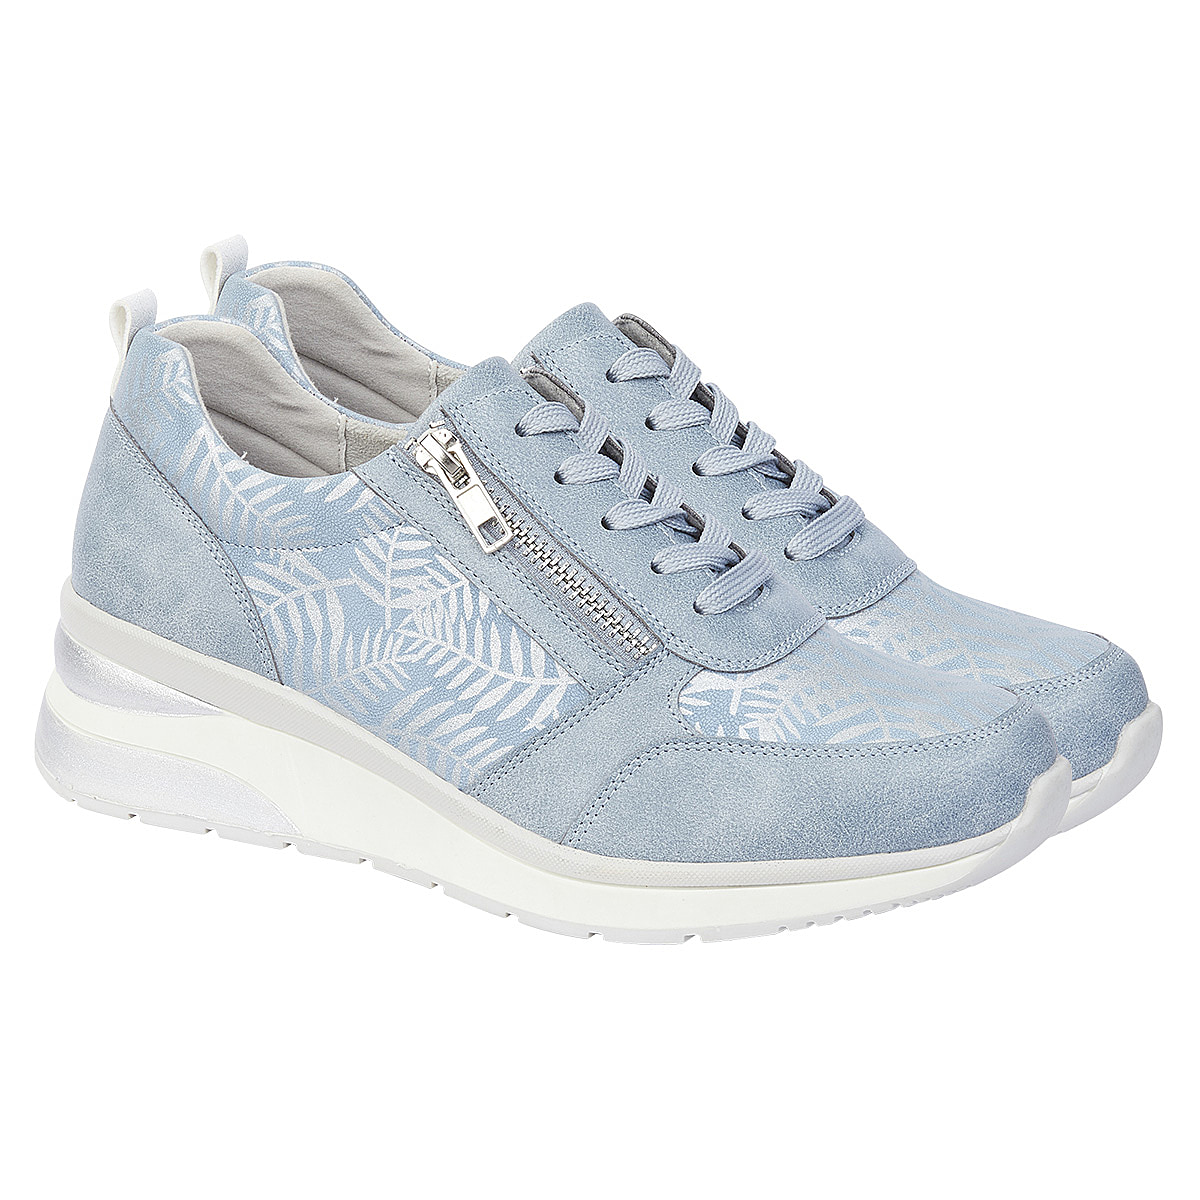 Lace Up Zip Fastening TROPICAL Ladies Shoes (Size 5) - Blue